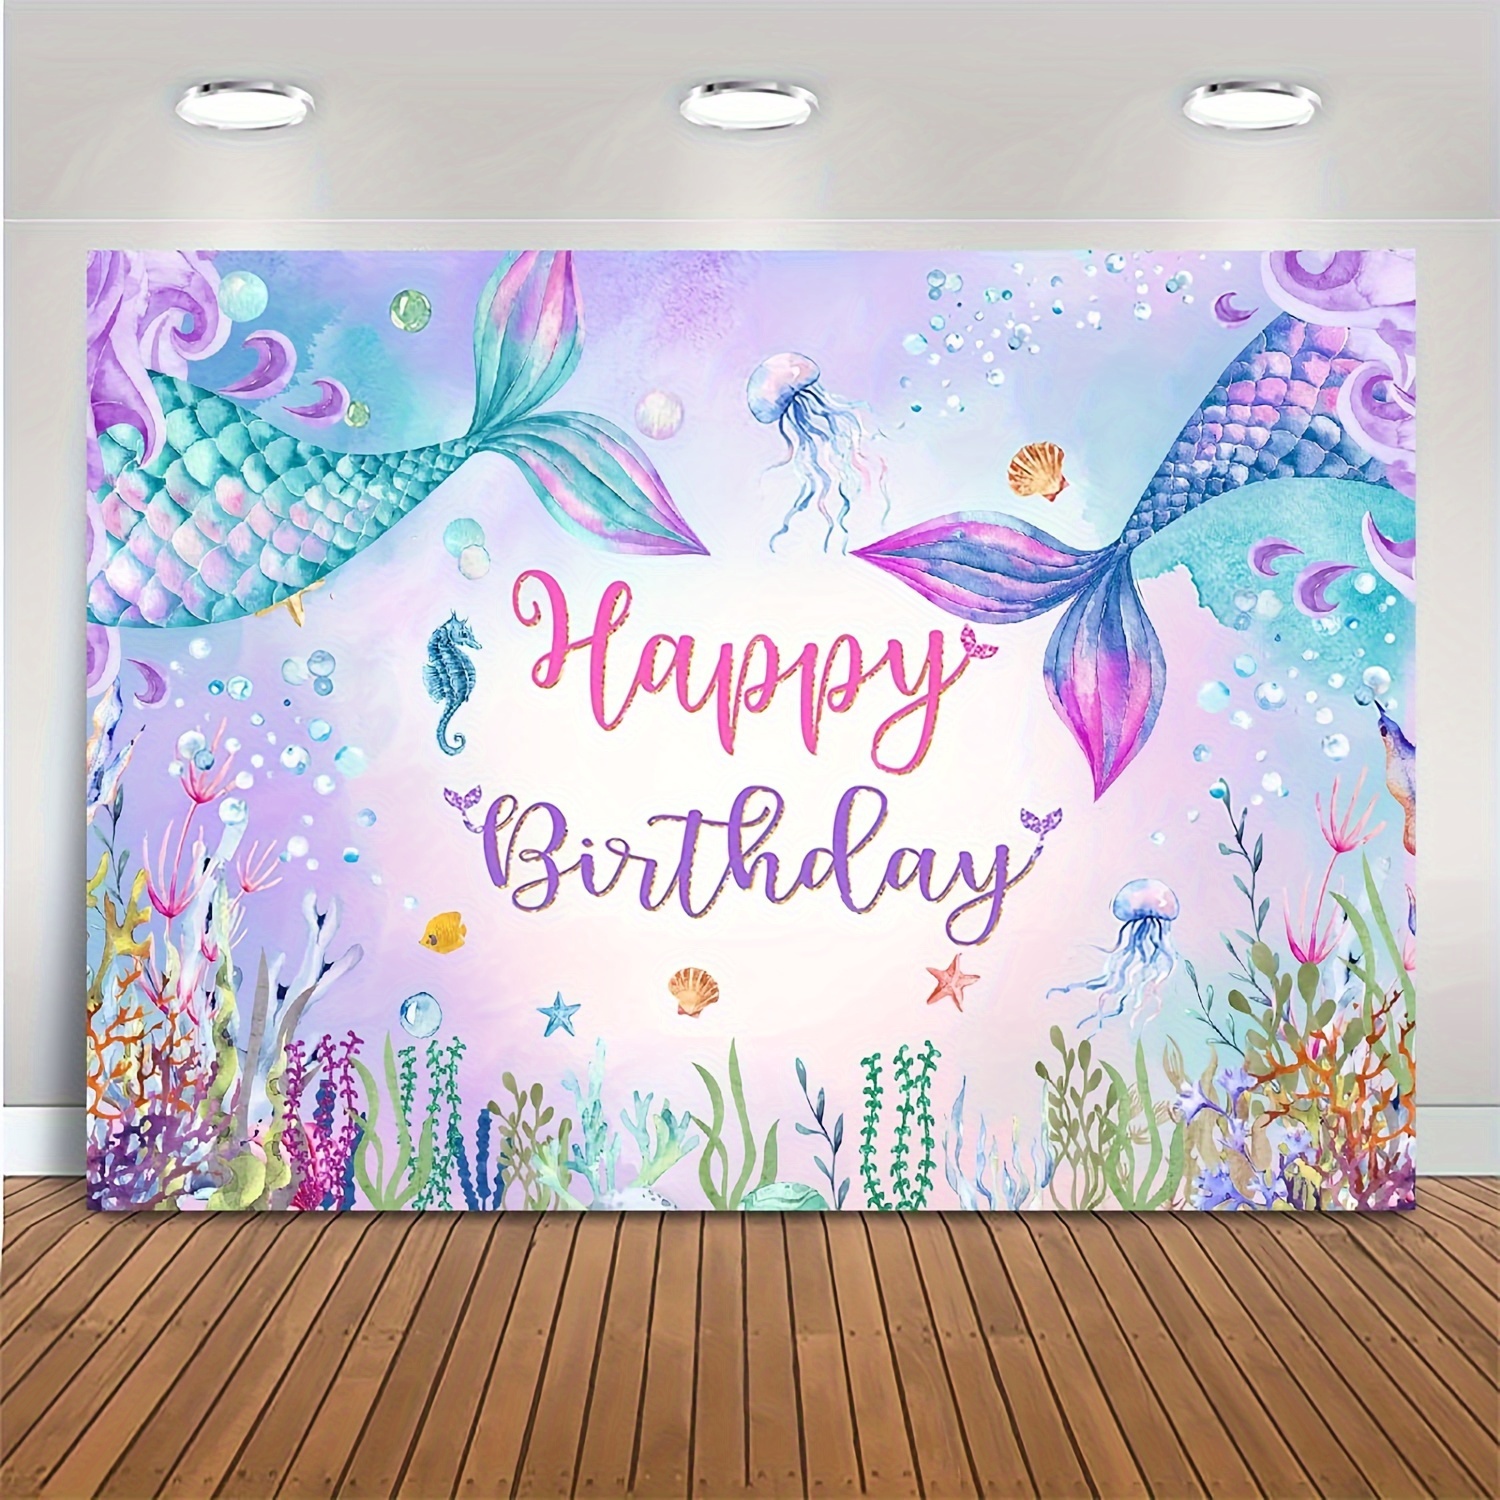 

1pc Mermaid Birthday Backdrop Under The Sea Birthday Party Decoration For Girl Blue Purple Mermaid Tails Photography Background Party Decor Supplies, Home Decor Supplies Indoor Outdoor Decor